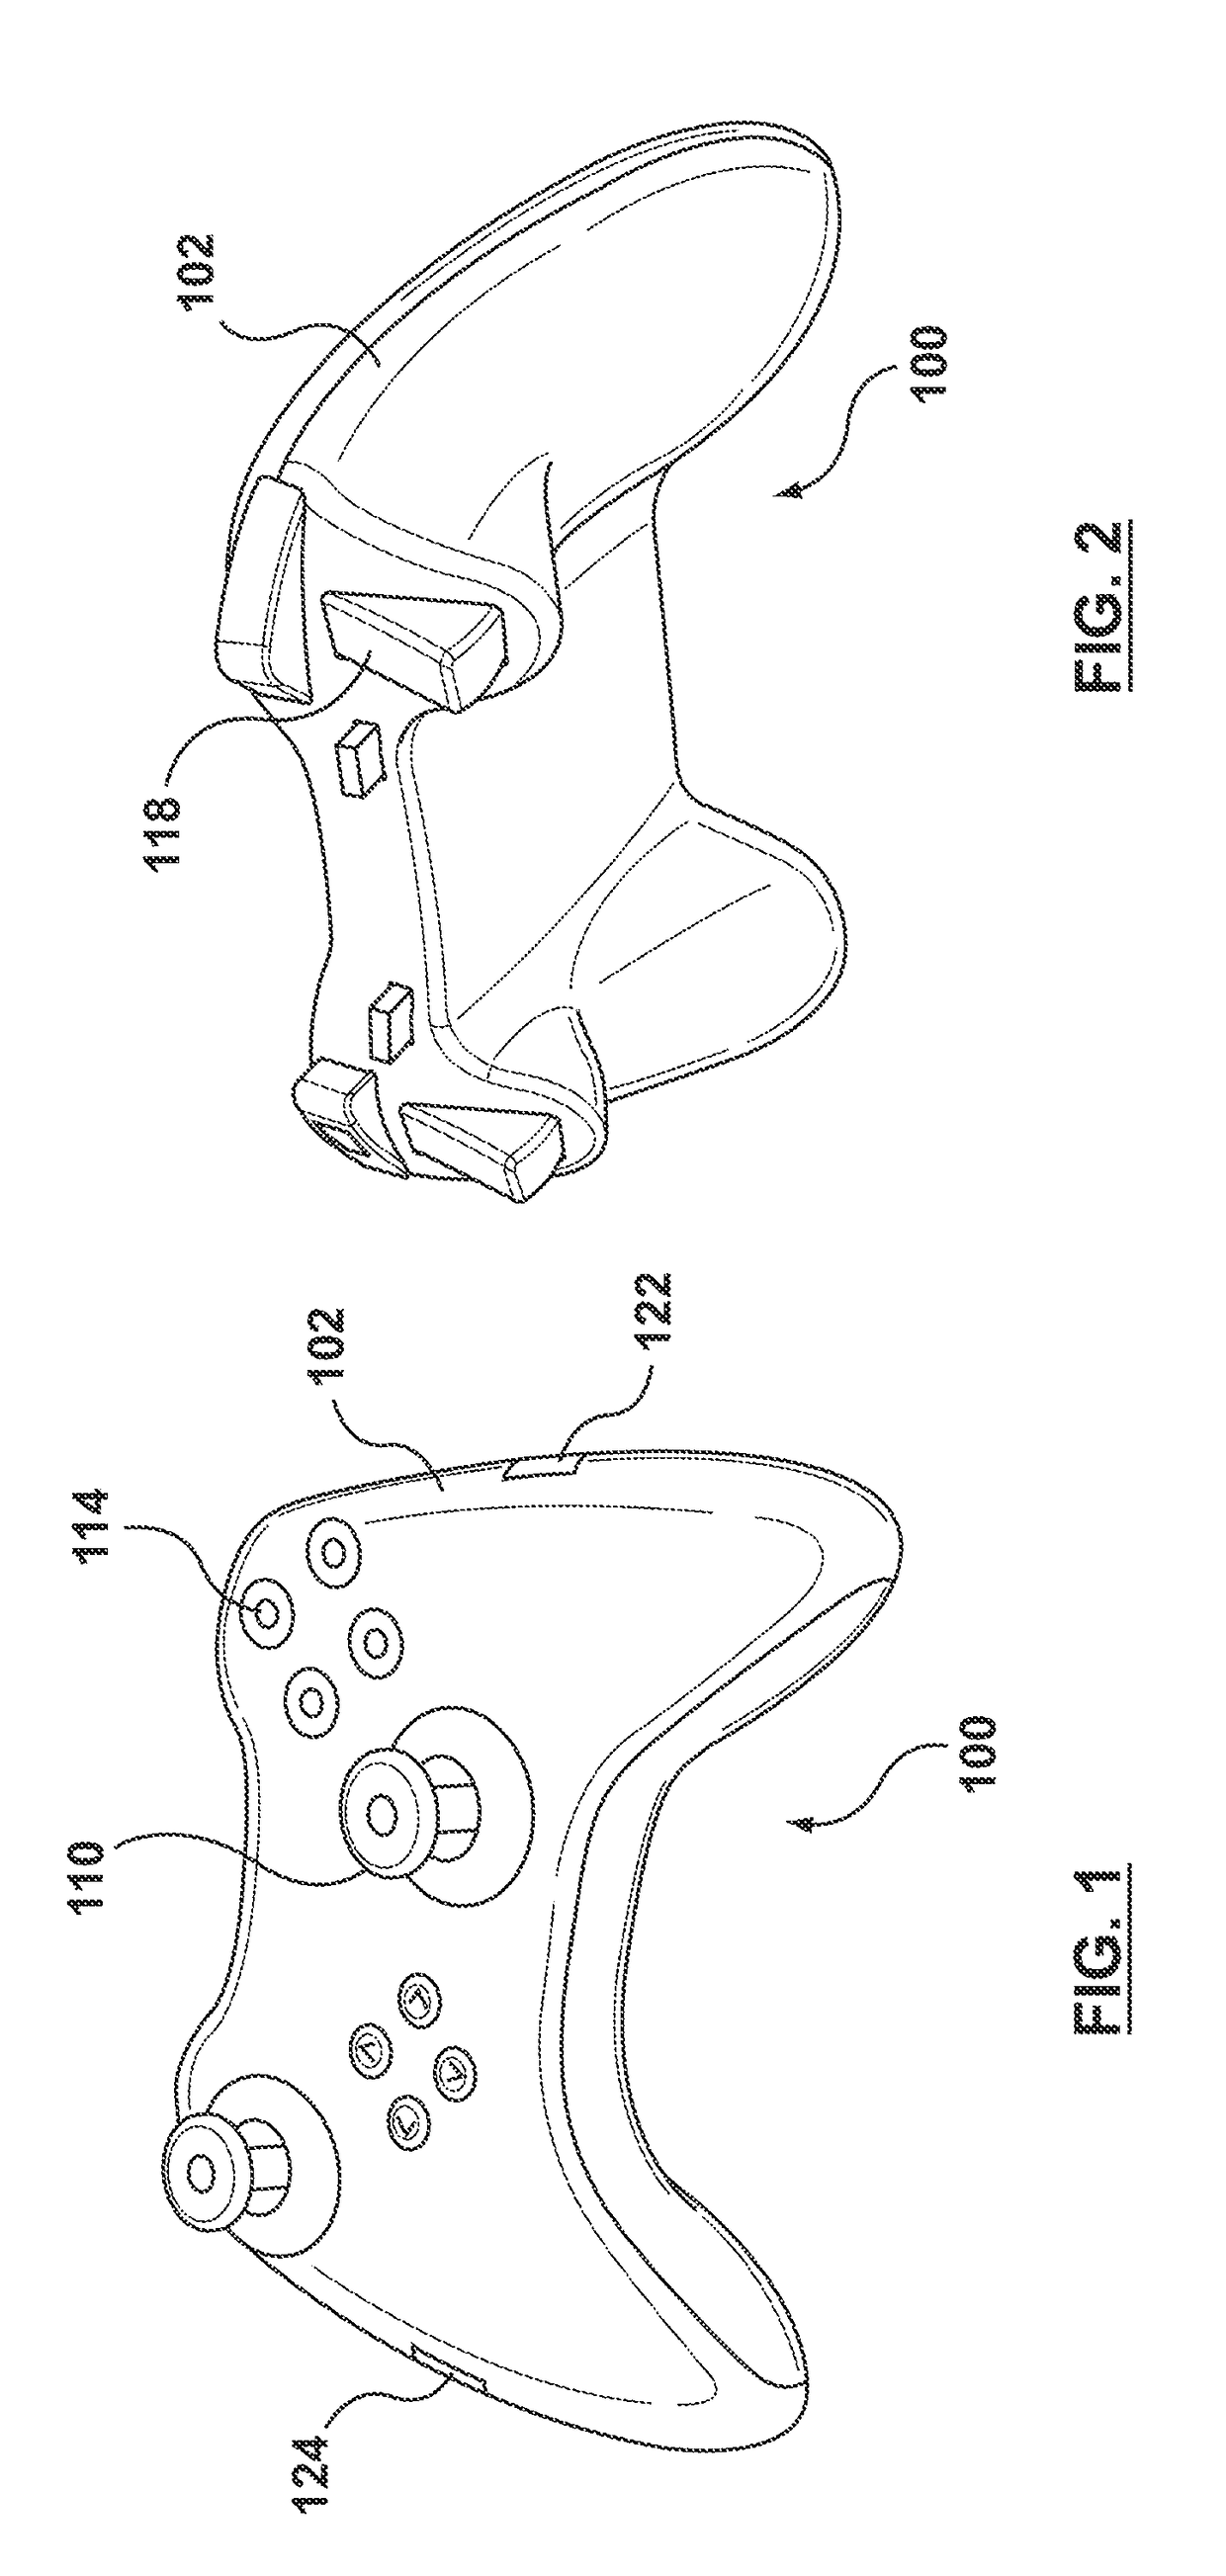 Gaming device having a haptic-enabled trigger